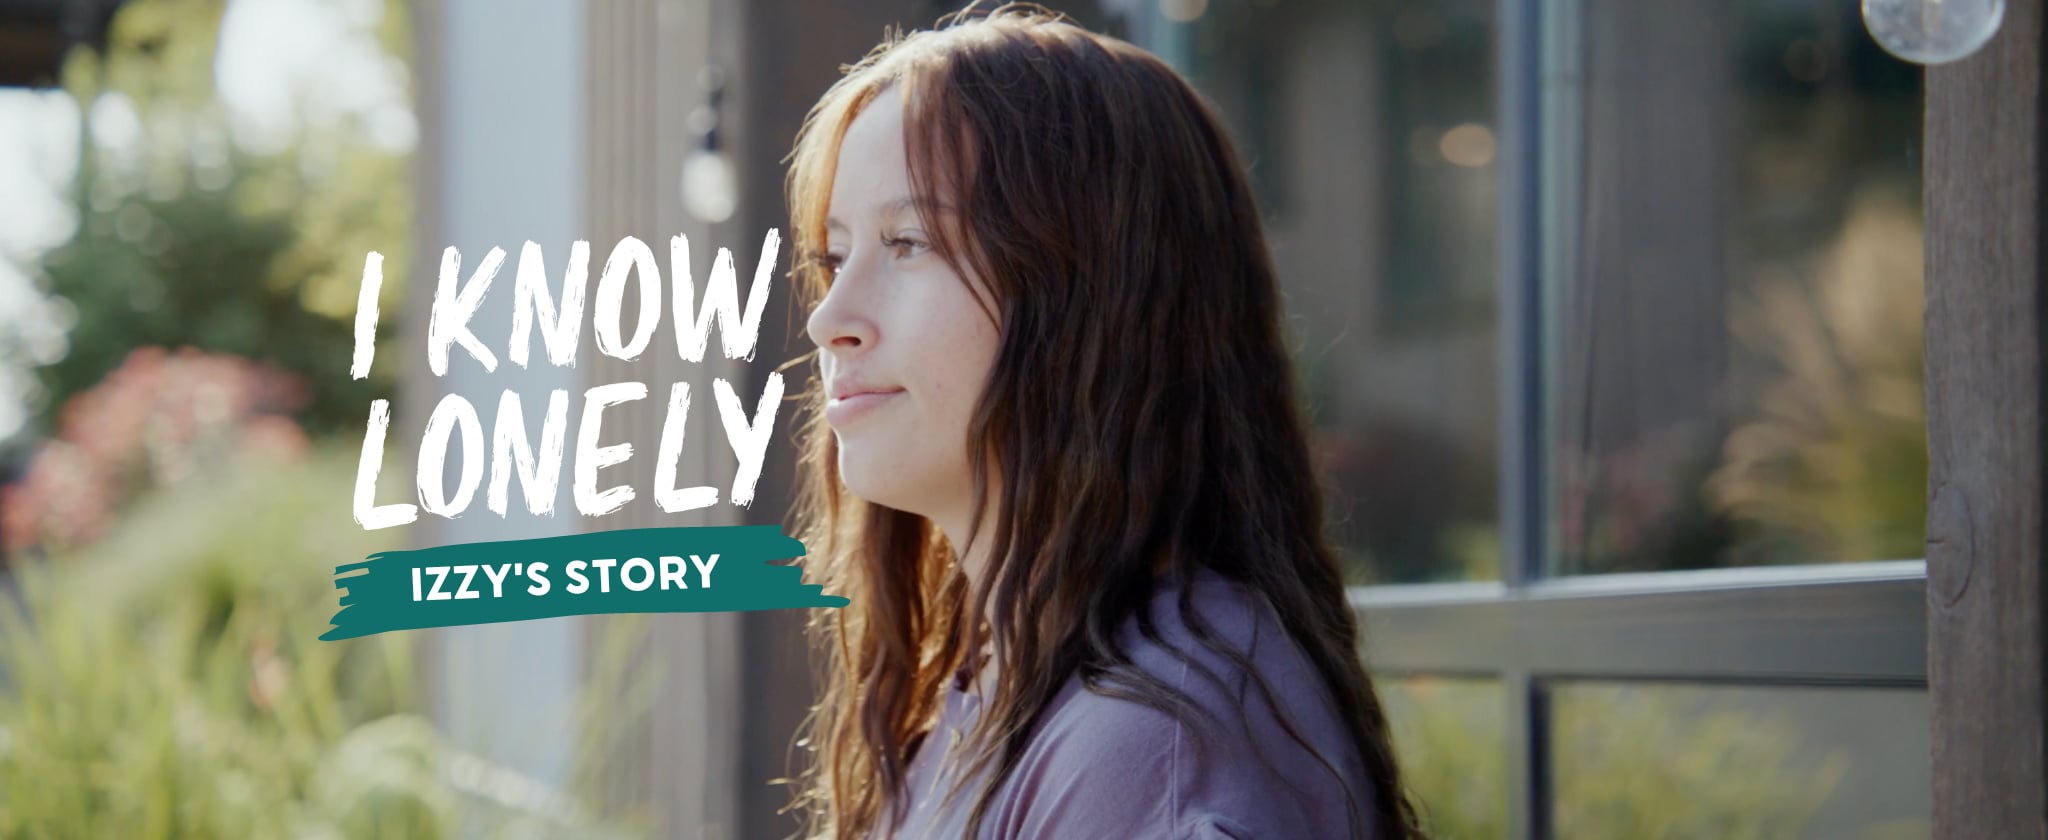 Izzy's Story: I Know Lonely Project on Vimeo